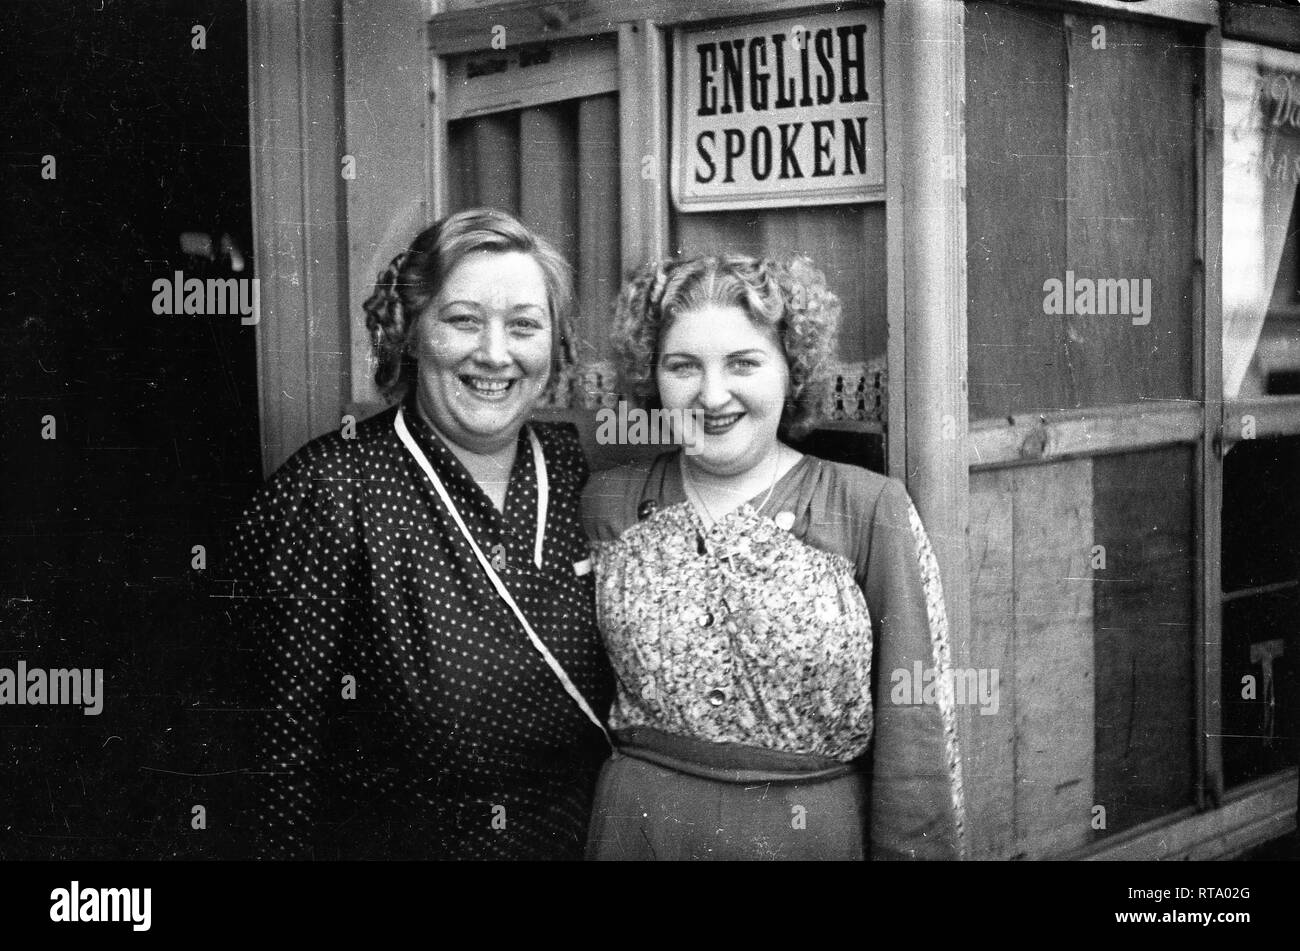 Bar cafe owners with English spoken sign on their cafe in Brussels Belgium September 1944 after liberation from the Germans during WW2 Stock Photo